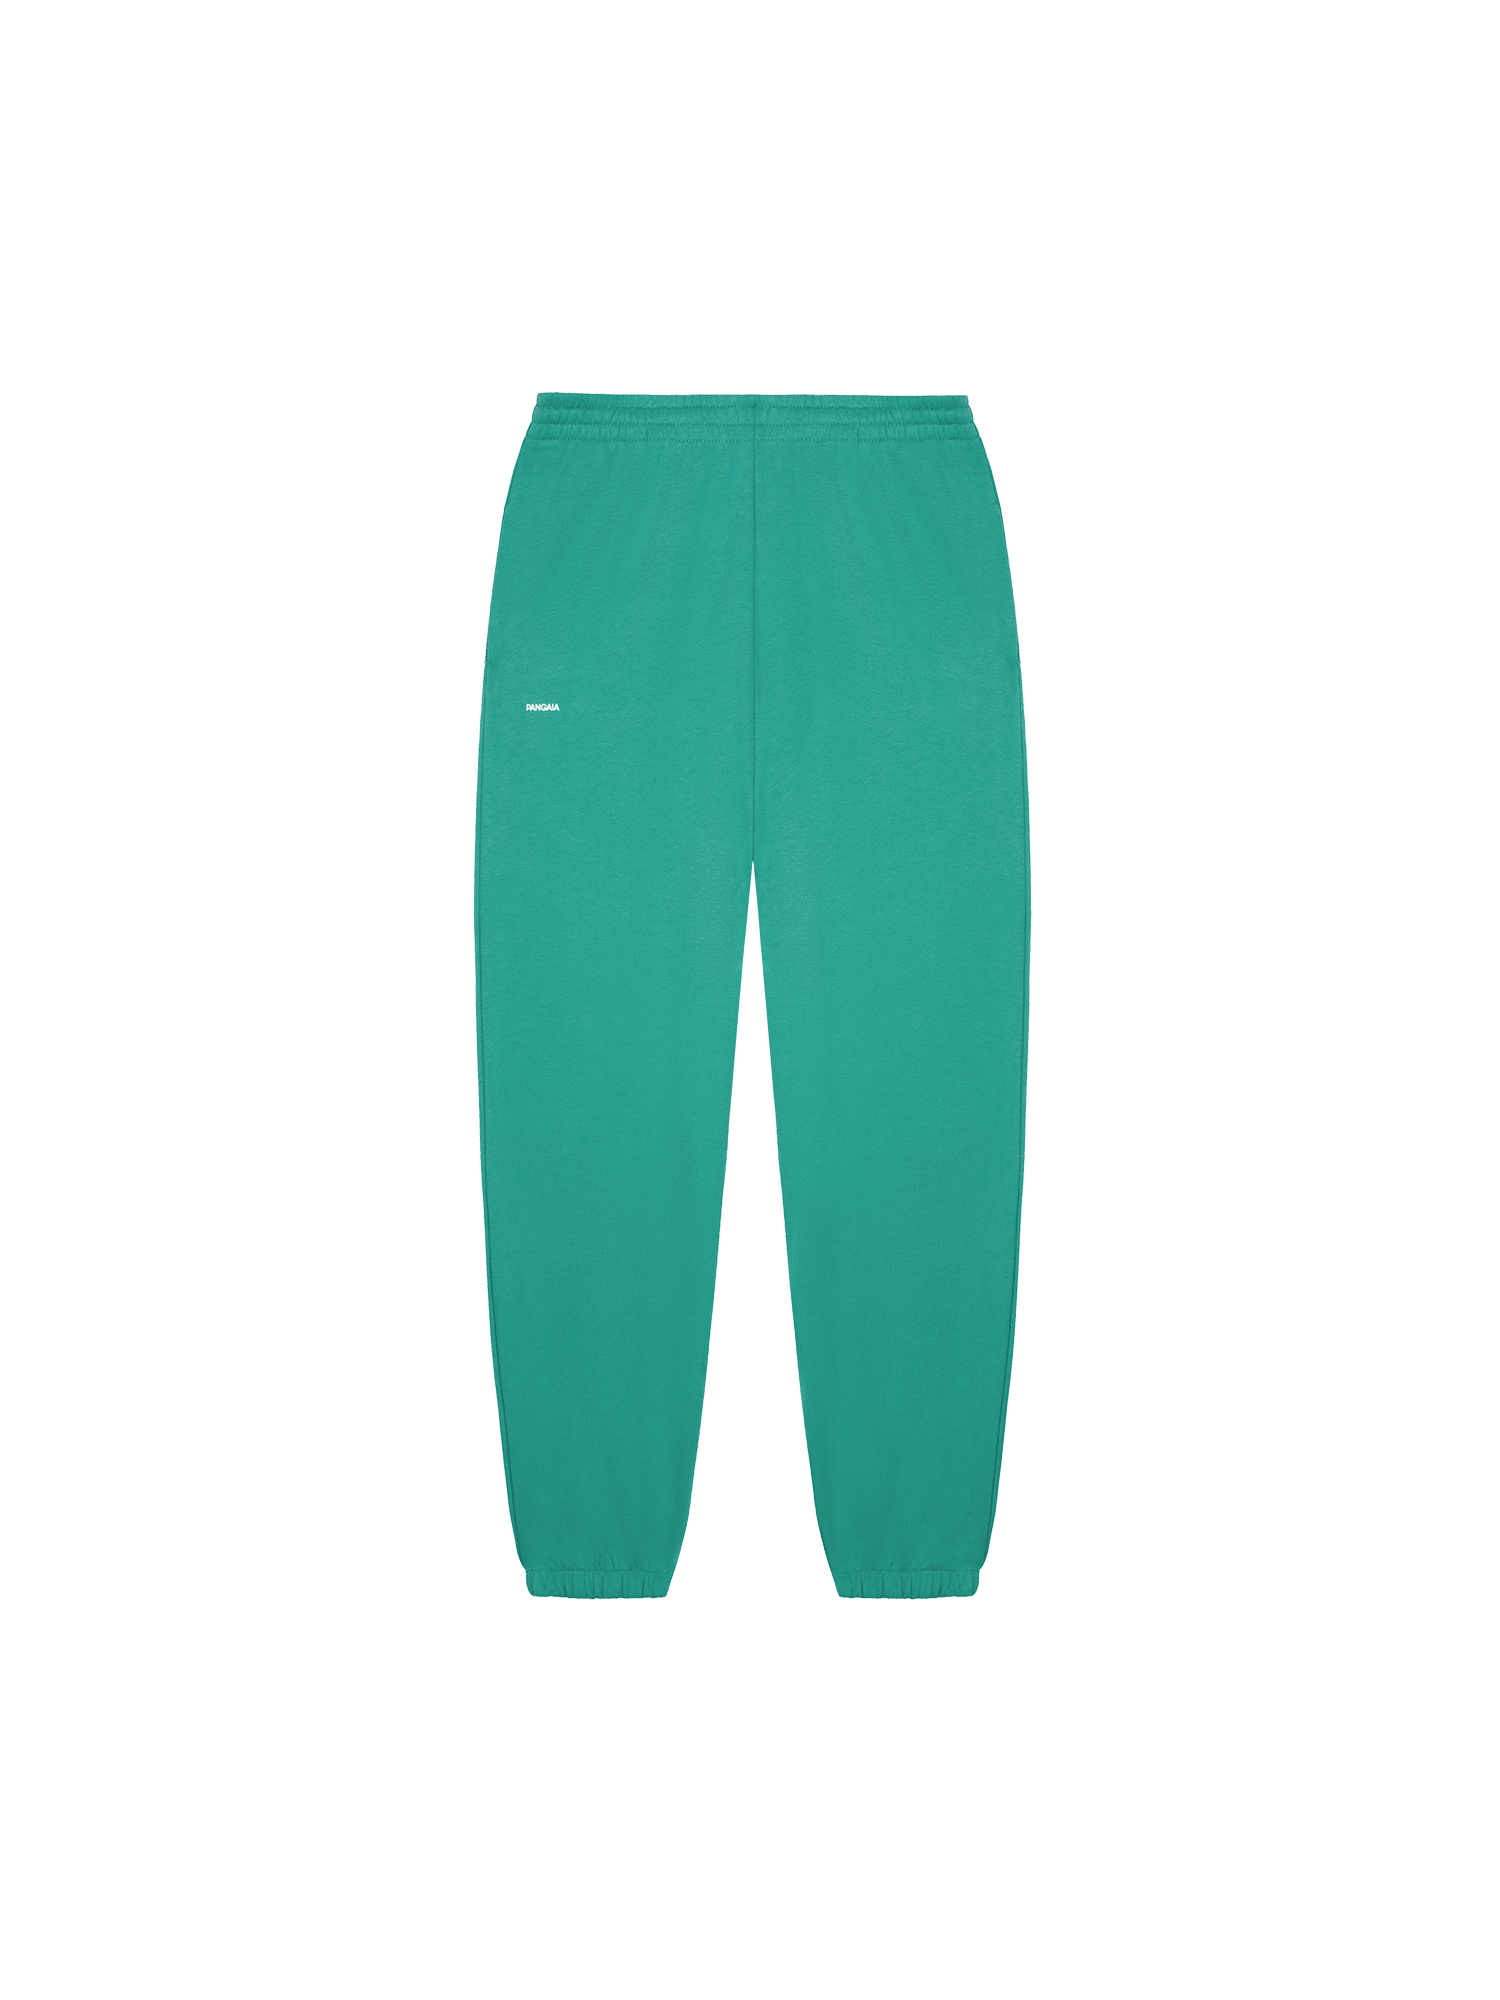 365 Midweight Track Pants-mangrove turquoise